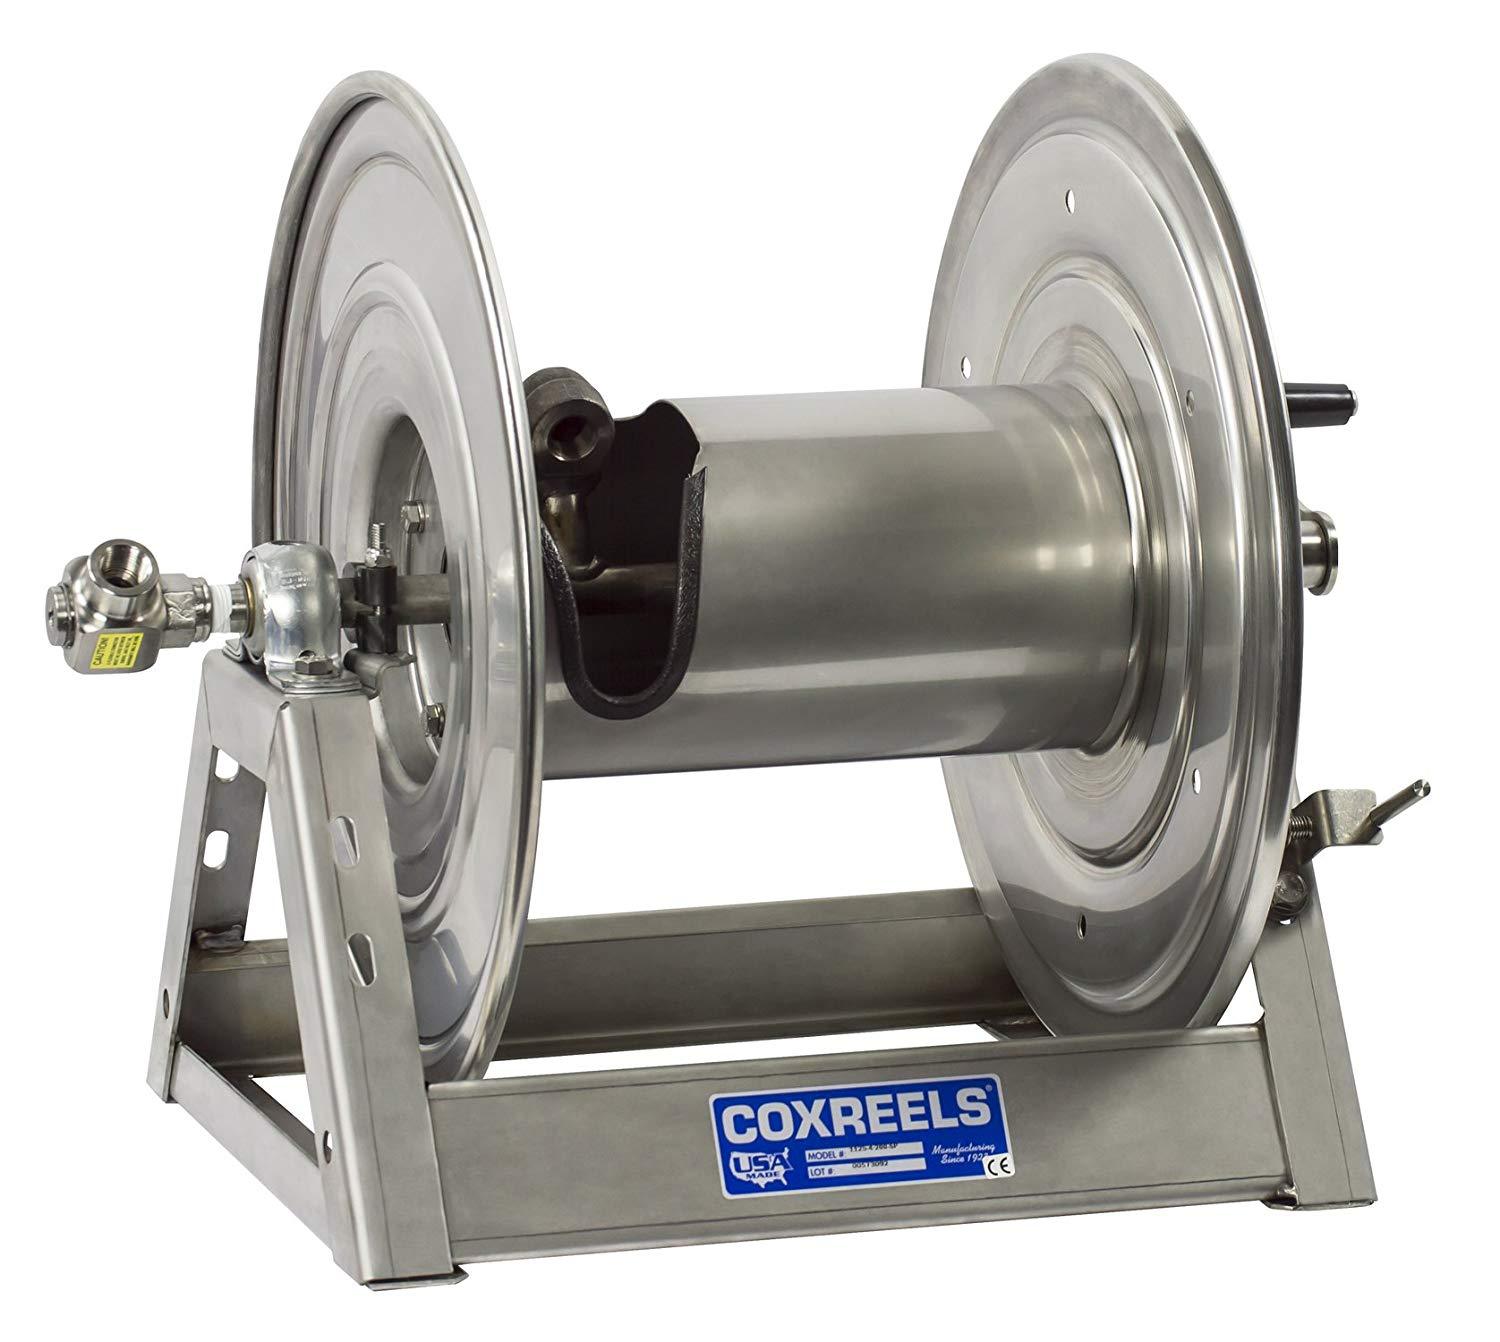 1125-4-100-E-SP : Coxreels 1125-4-100-E-SP Stainless Steel Compressed